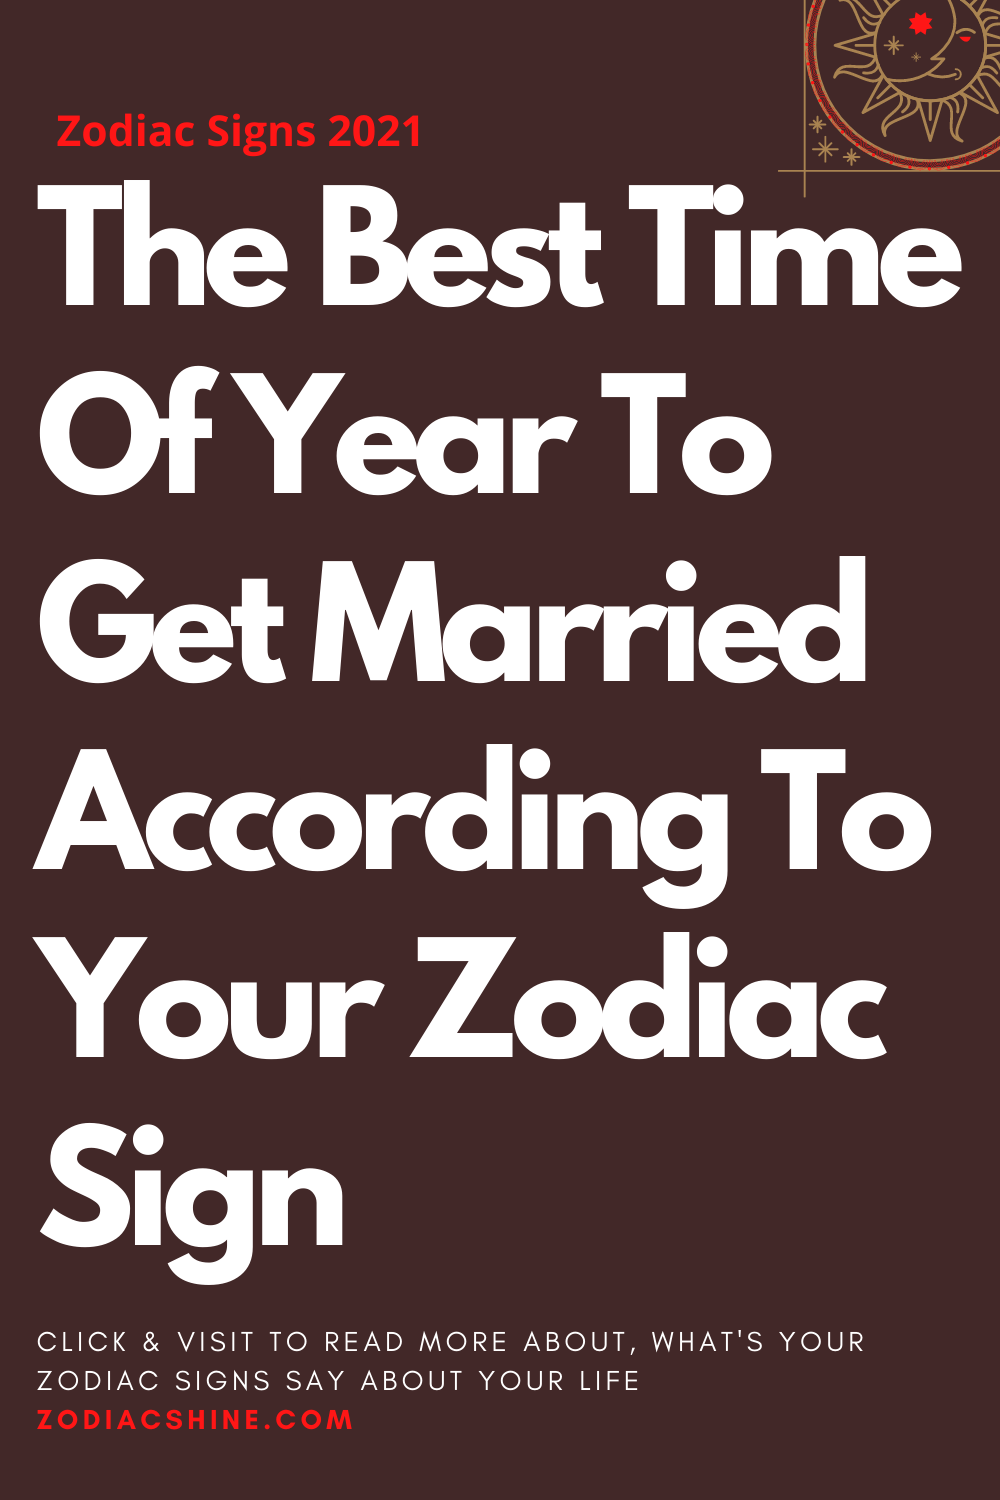 The Best Time Of Year To Get Married According To Your Zodiac Sign